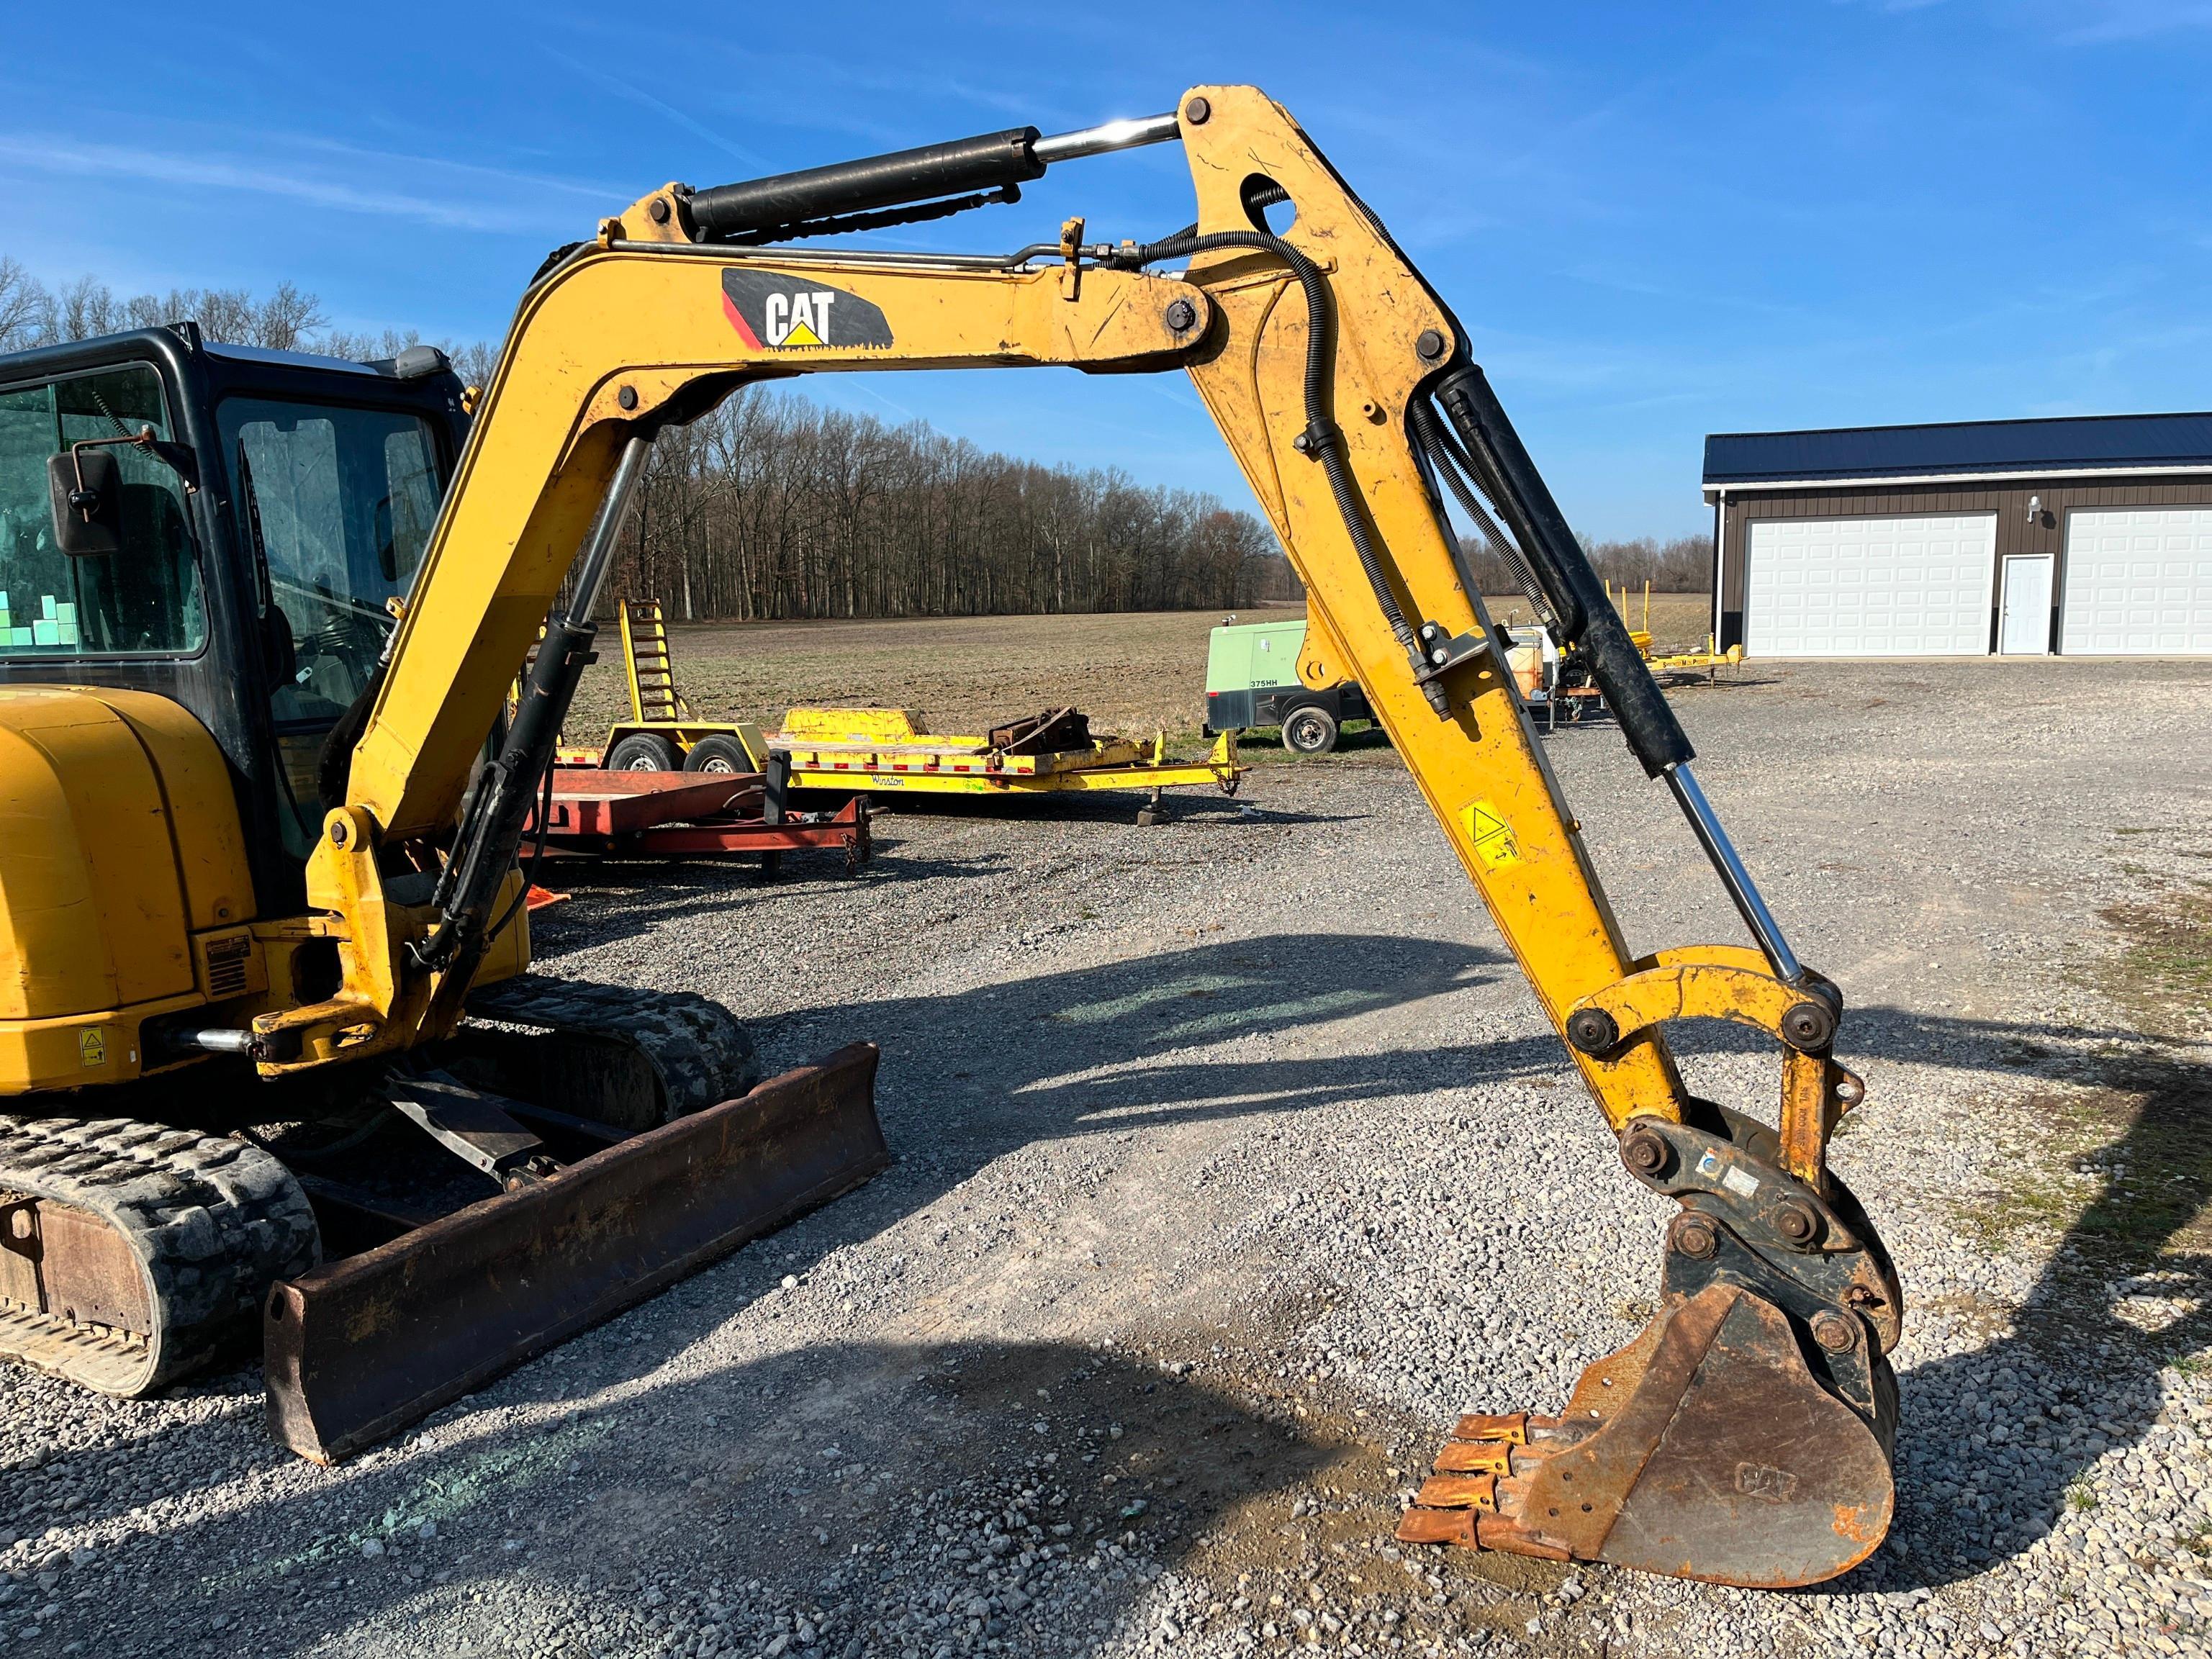 2014 CAT 305ECR HYDRAULIC EXCAVATOR SN:XFA03284 powered by Cat C2.4 diesel engine, equipped with